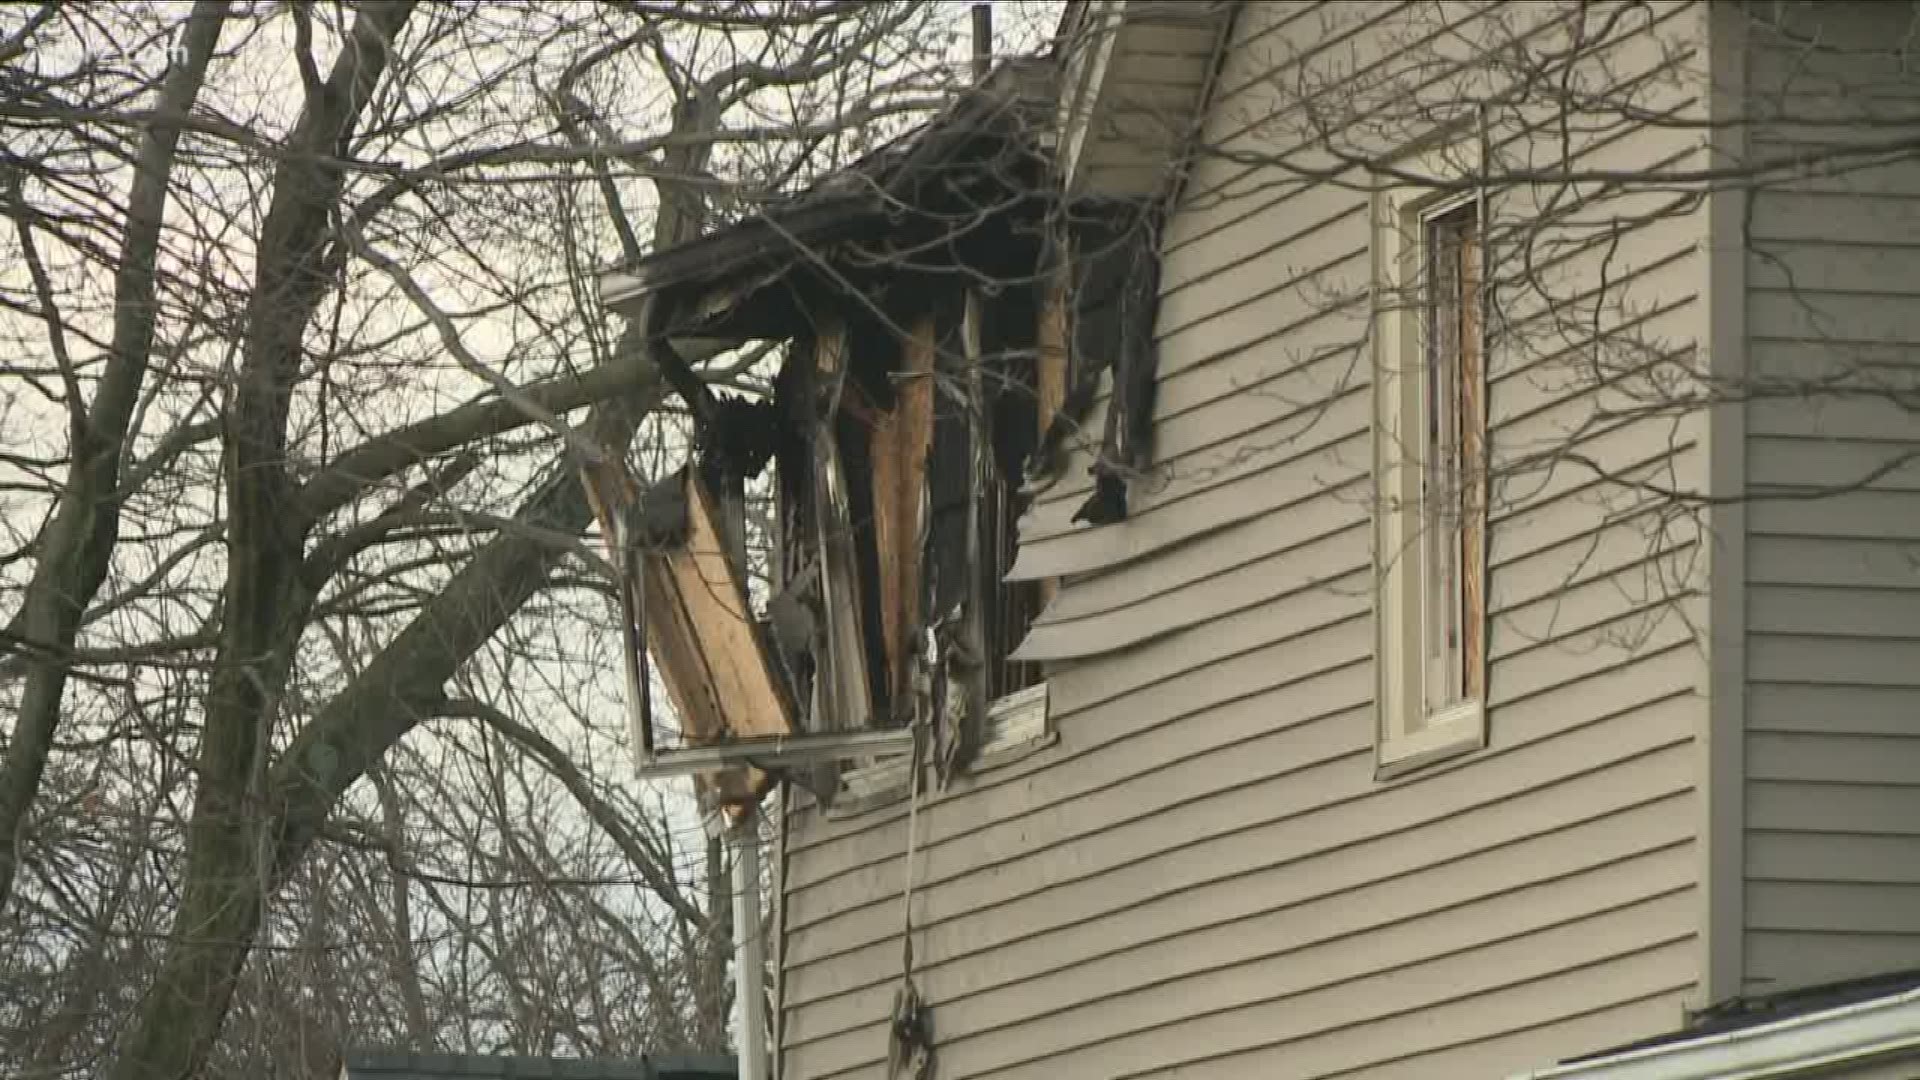 Man Dies In Fire Caused By Space Heater